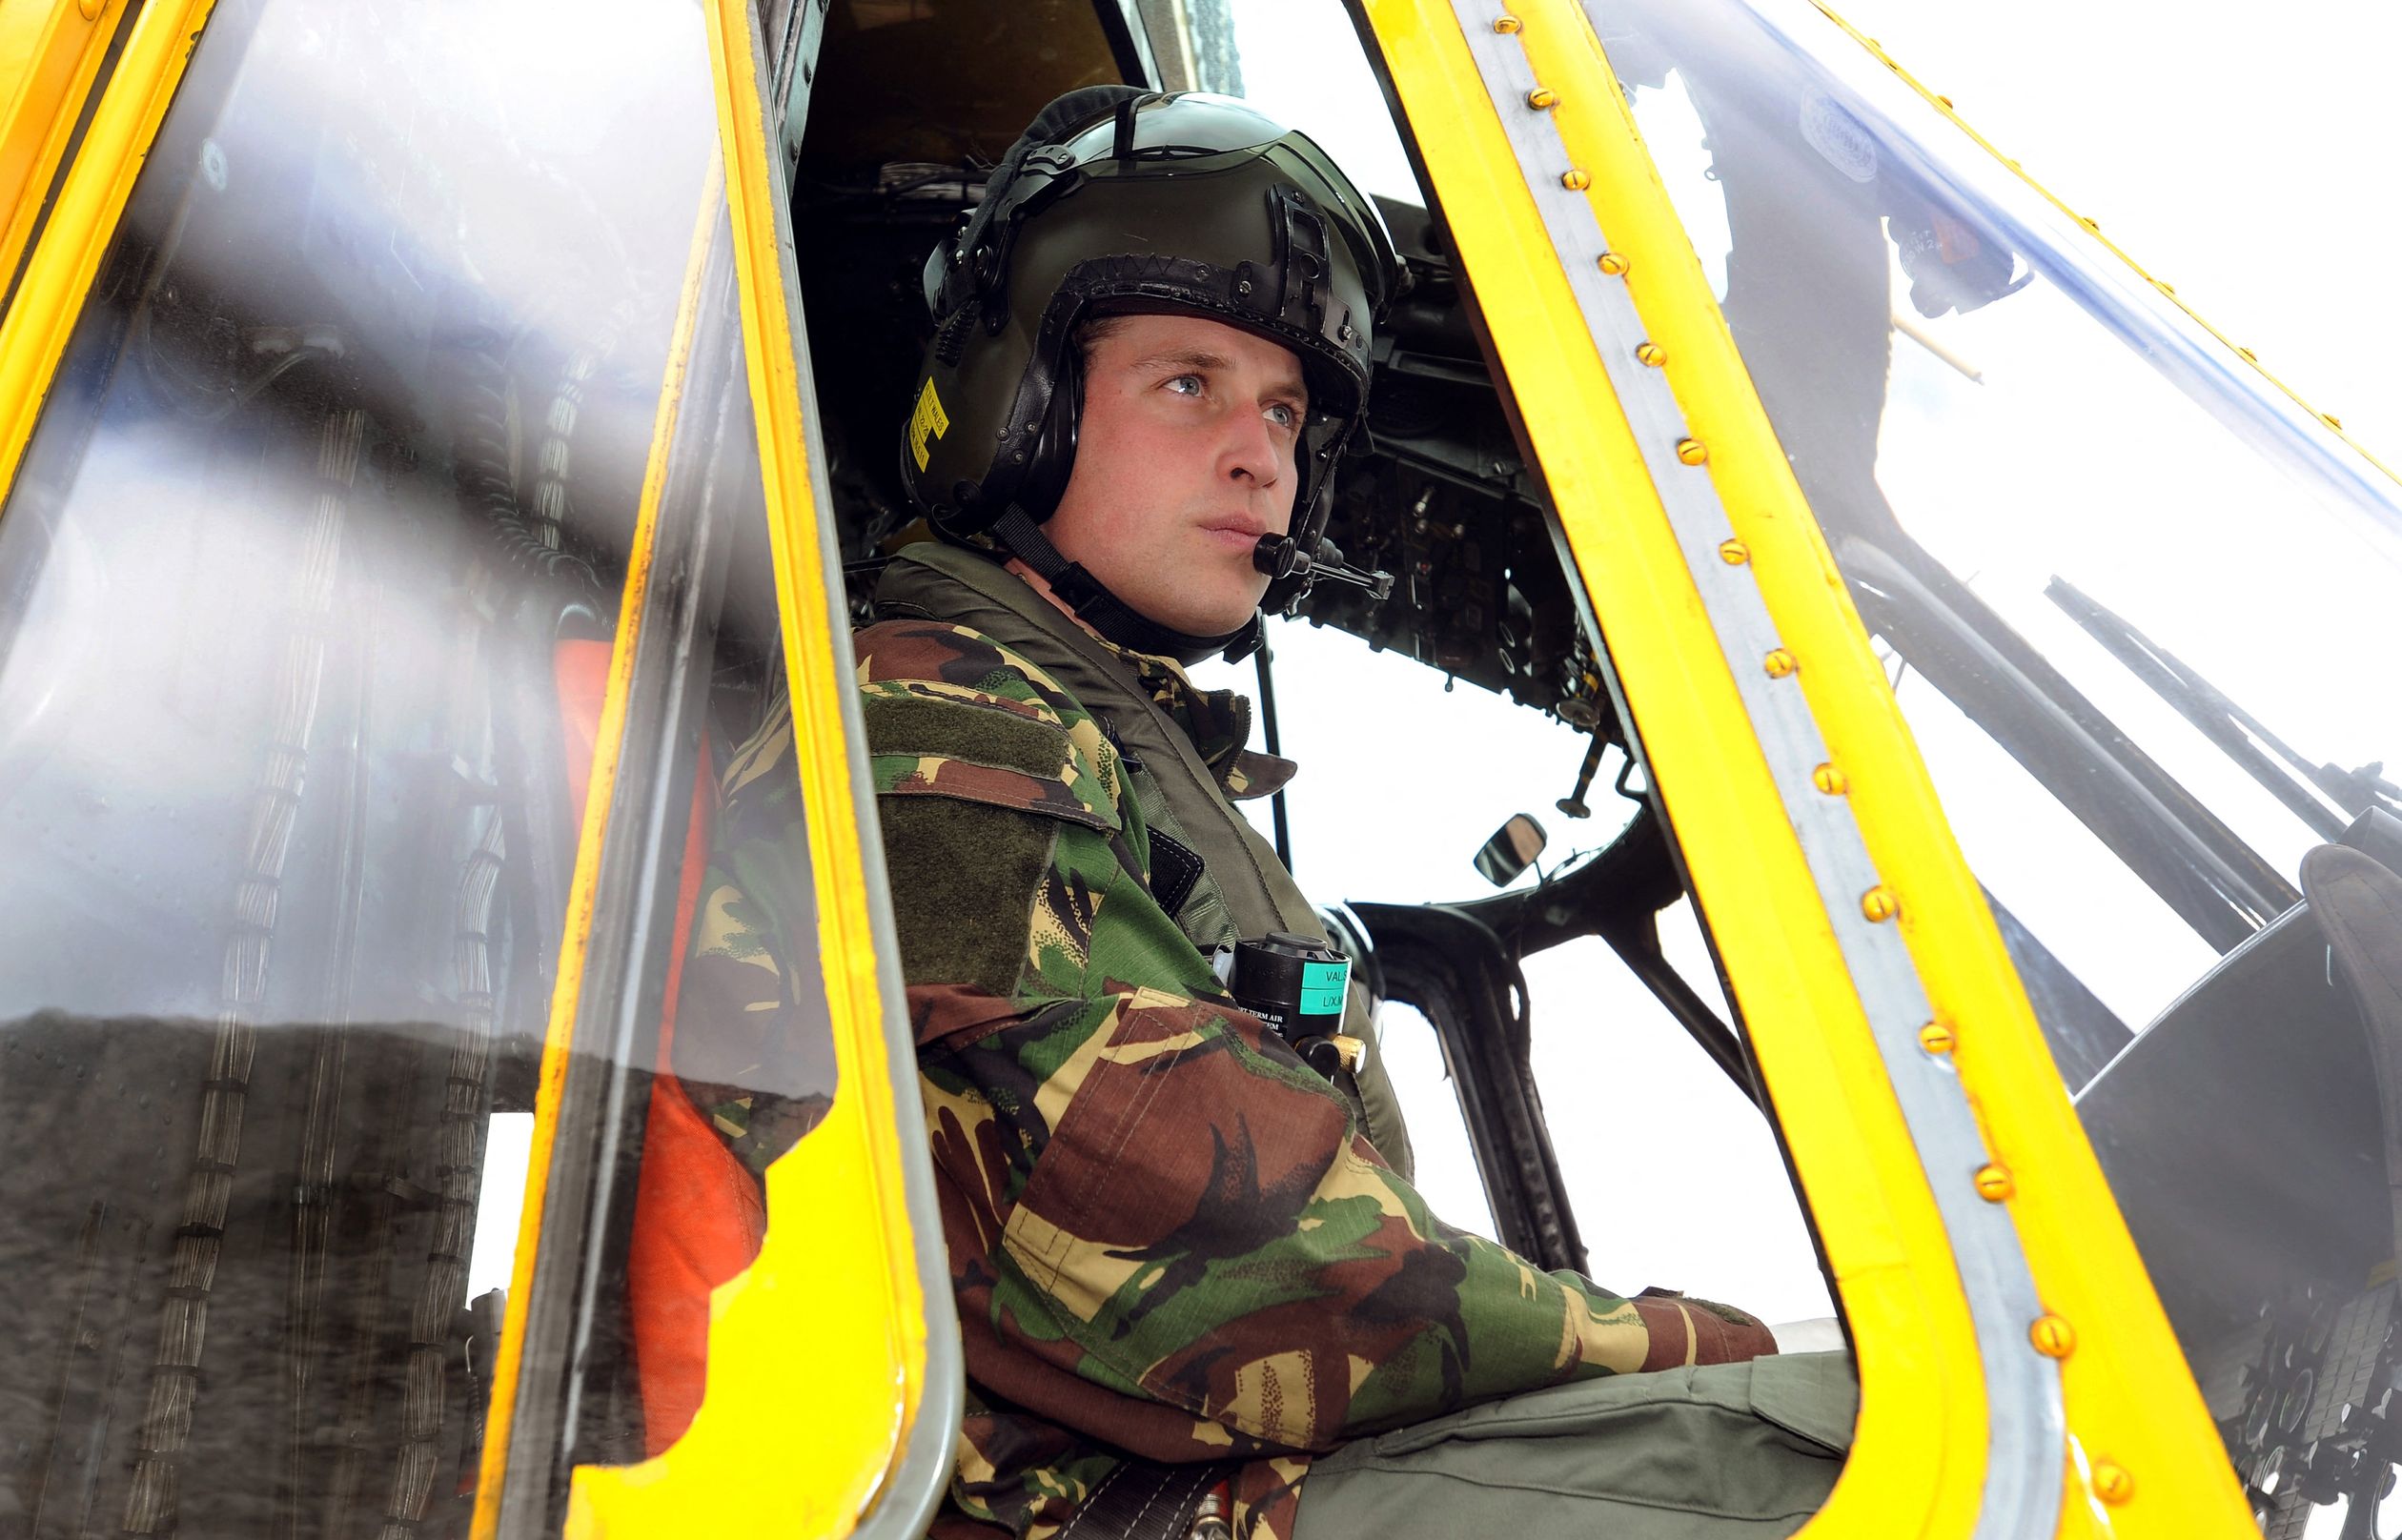 William in Helikopter